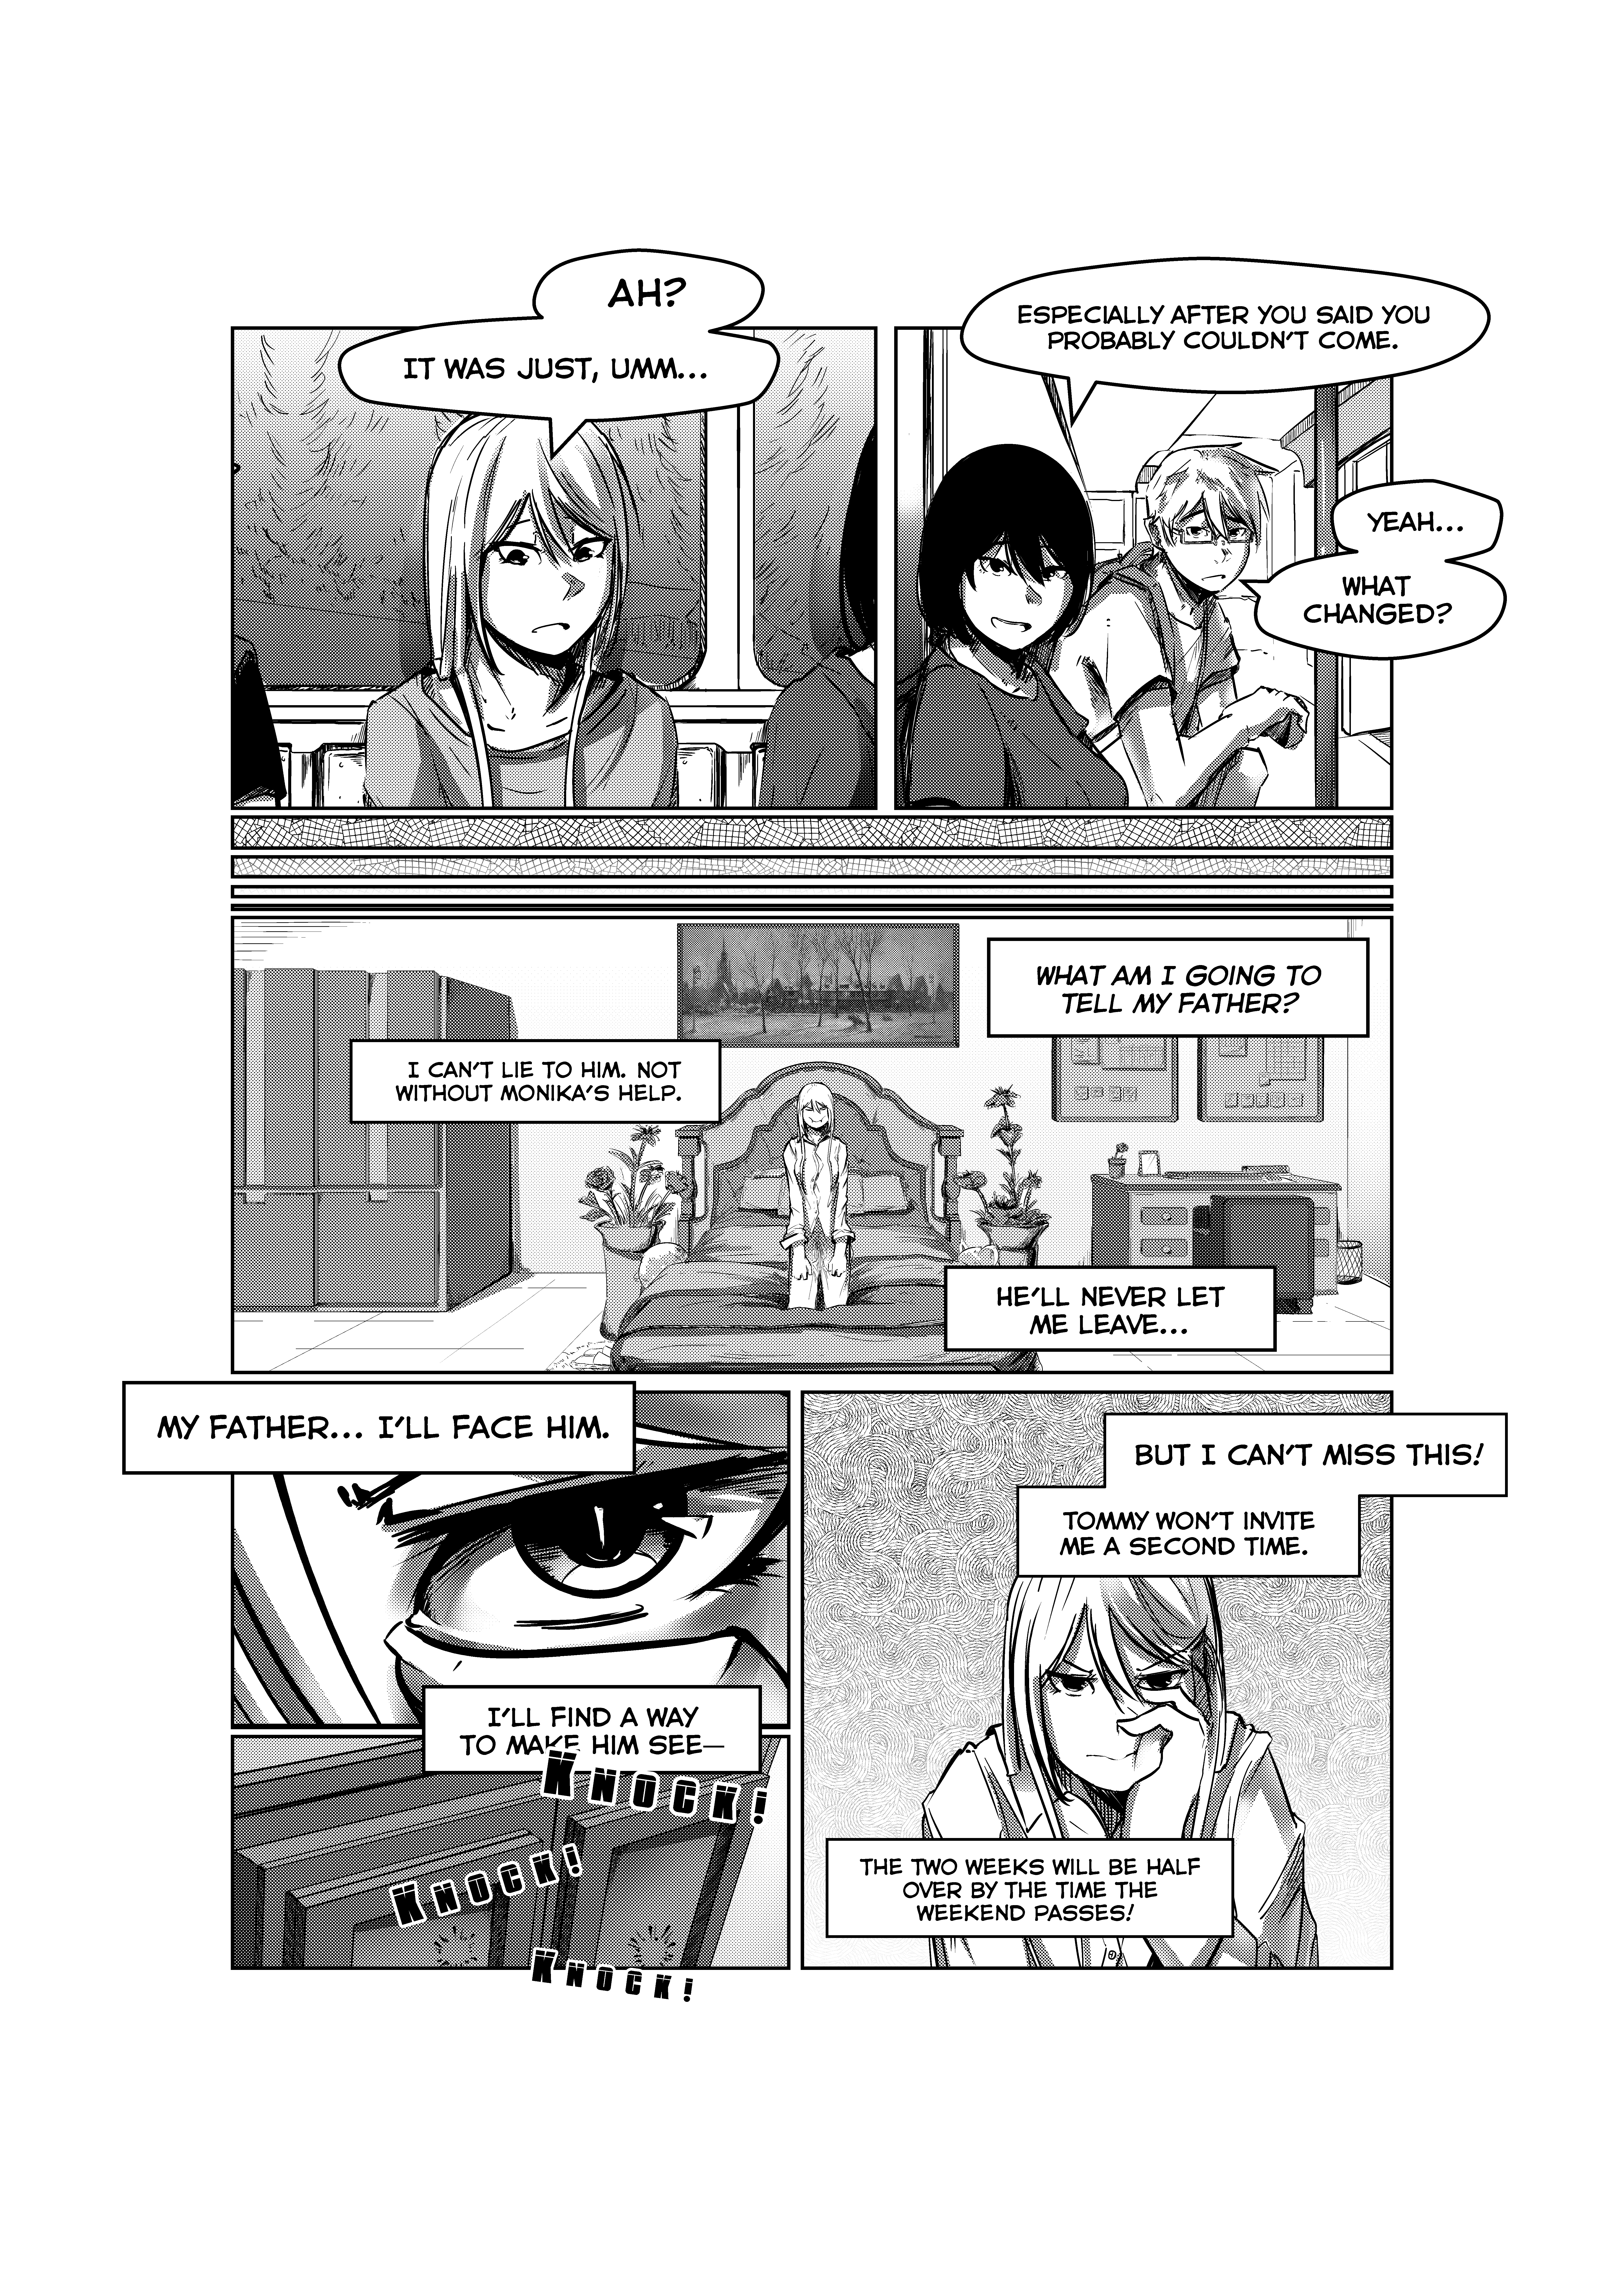 Opposites In Disguise - 10 page 3